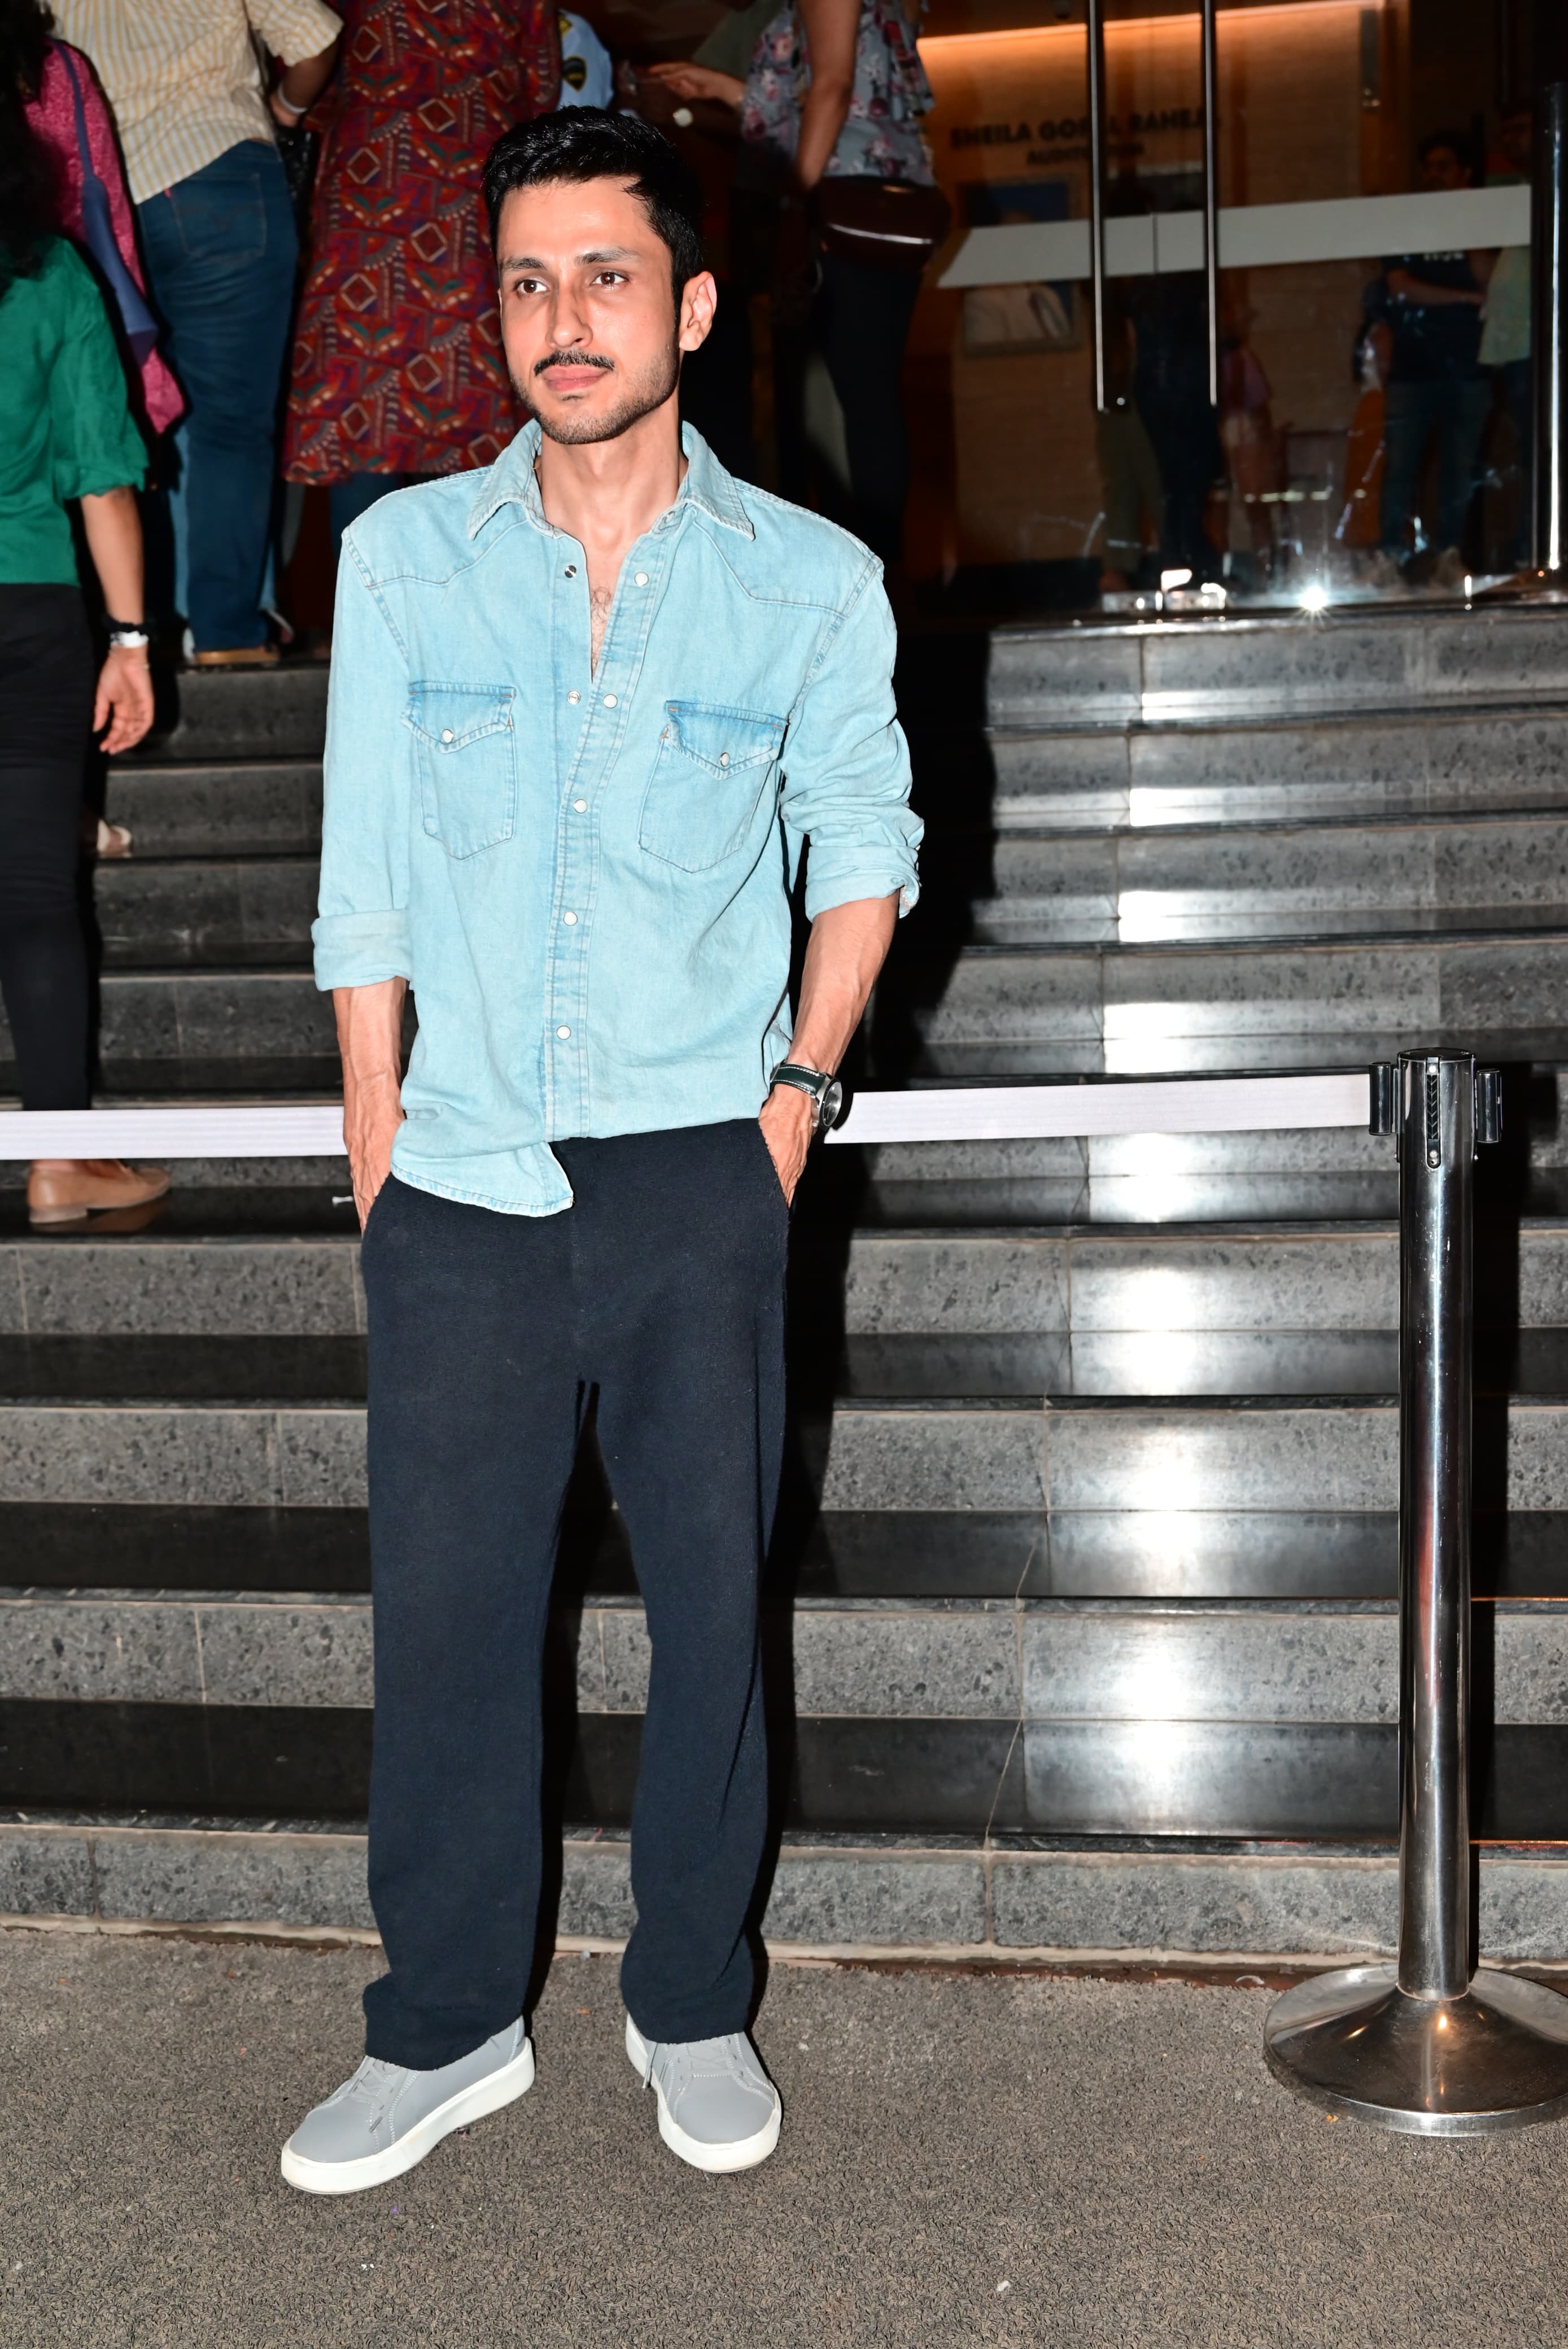 Amol Parashar was snapped in the city in stylish yet simple look